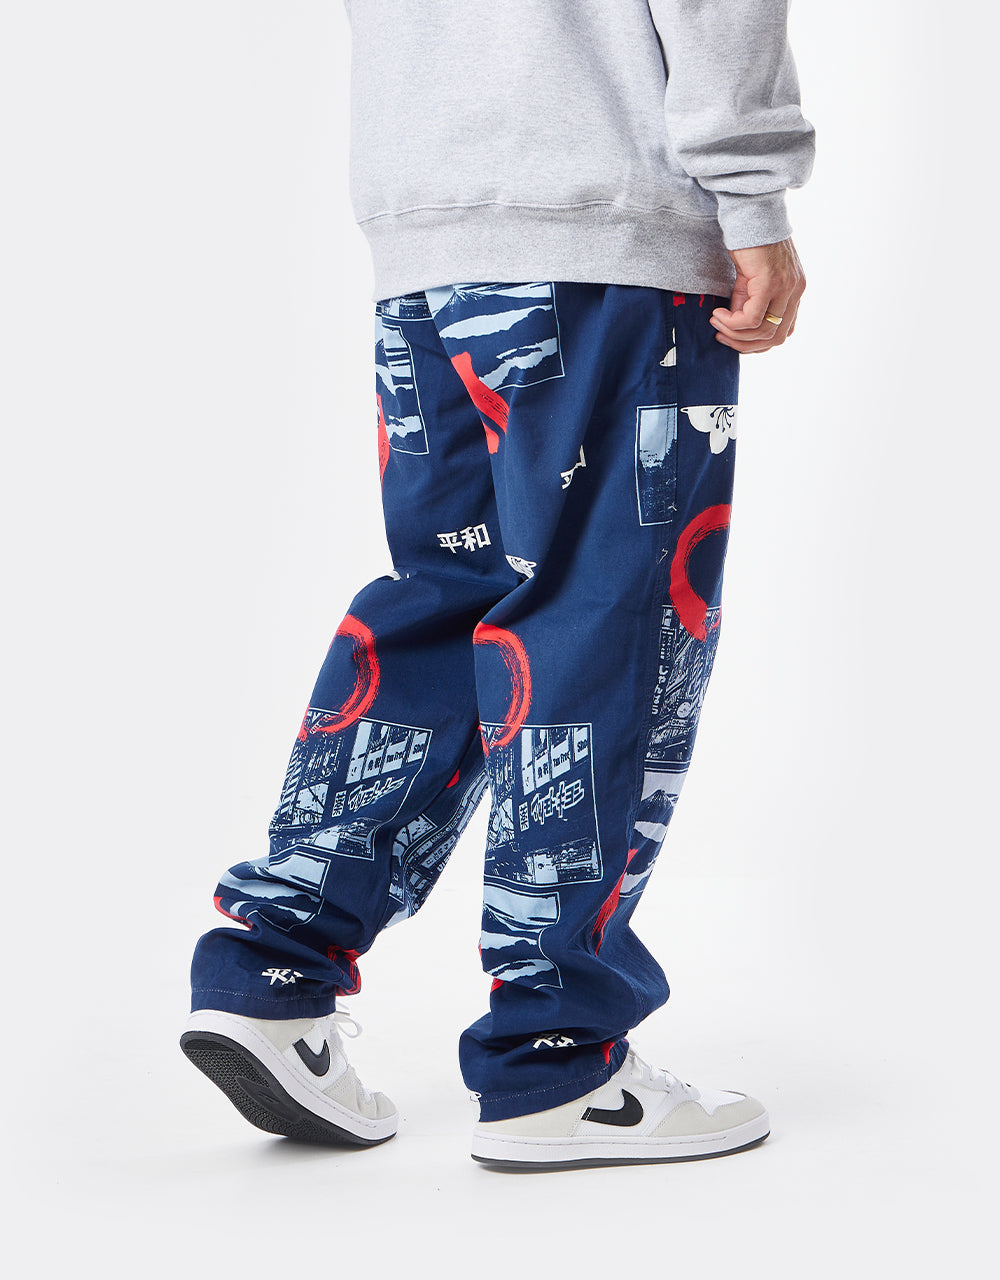 Route One Organic Baggy Pants - Yamato Navy/White/Red